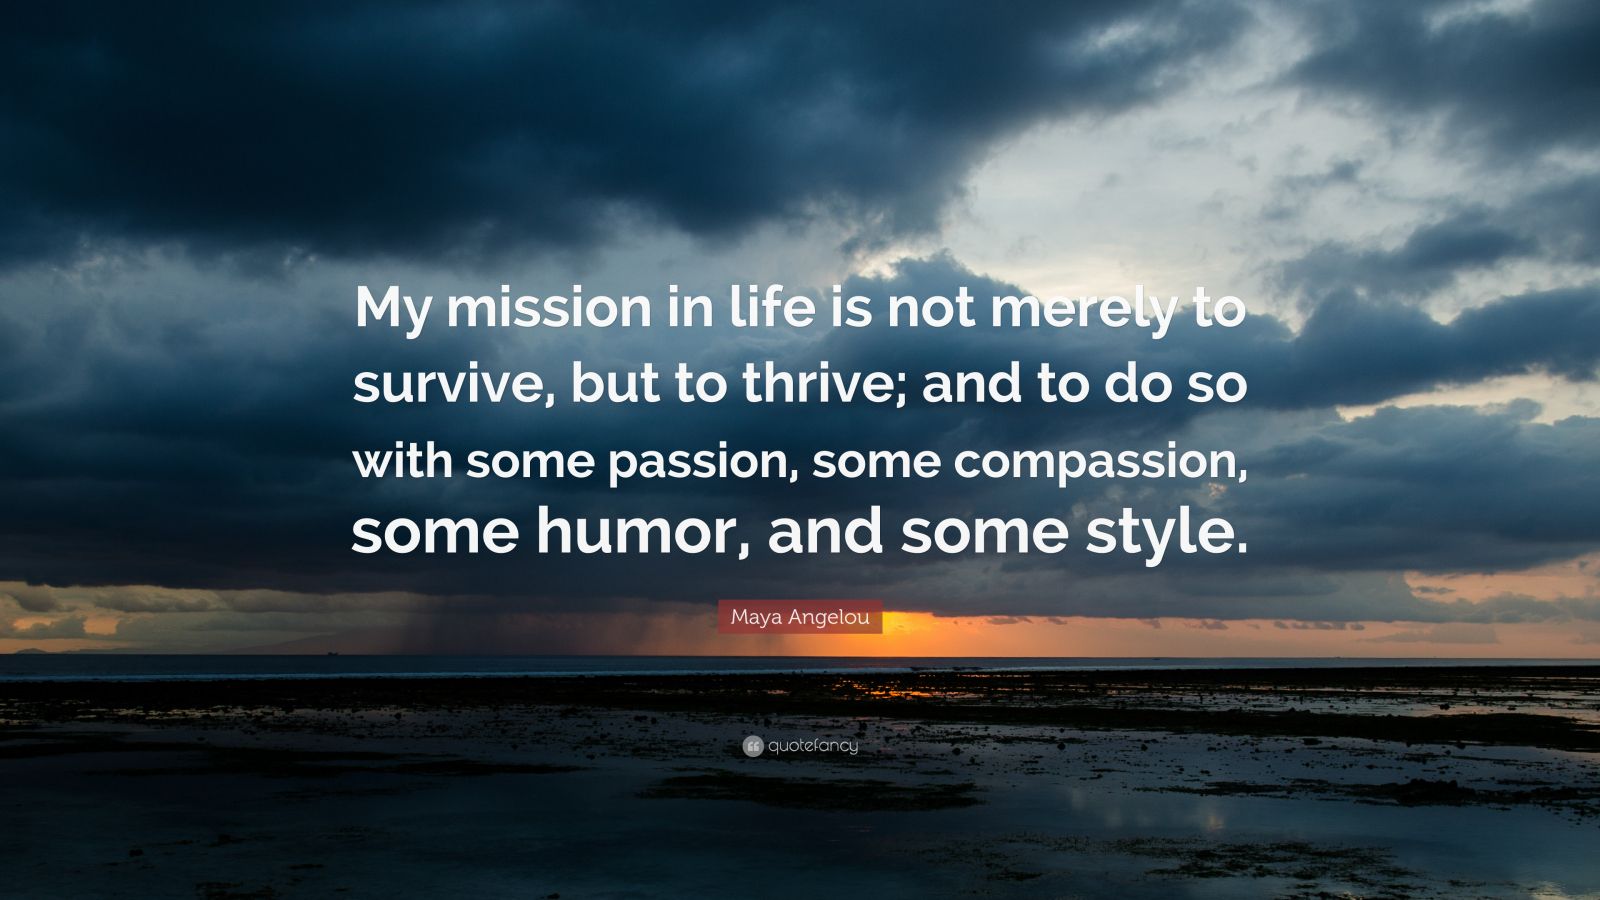 Maya Angelou: My Mission In Life